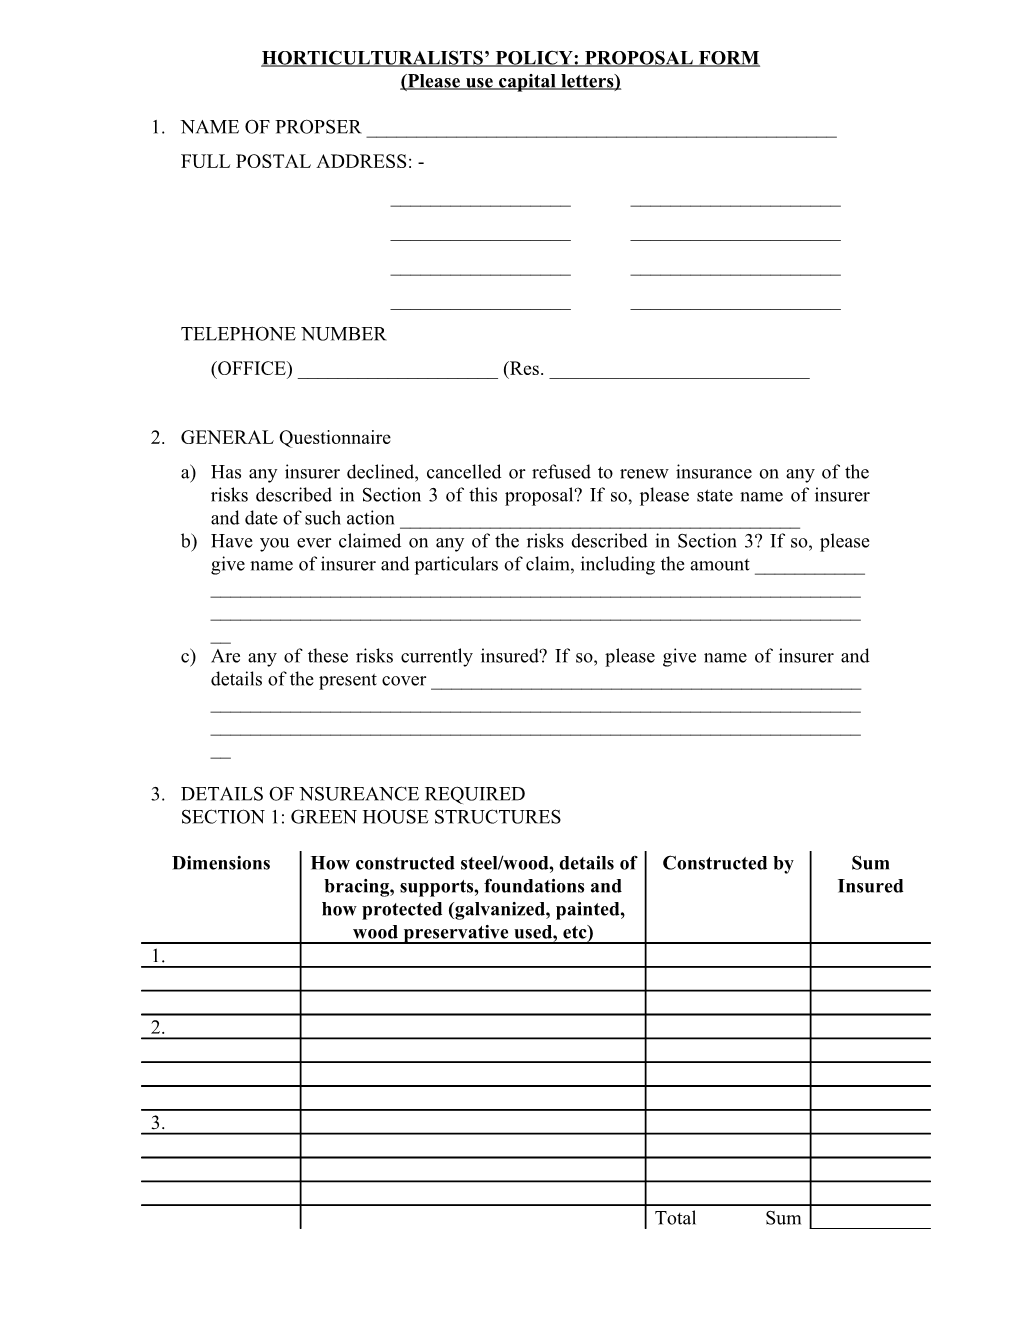 Horticulturalists Policy: Proposal Form